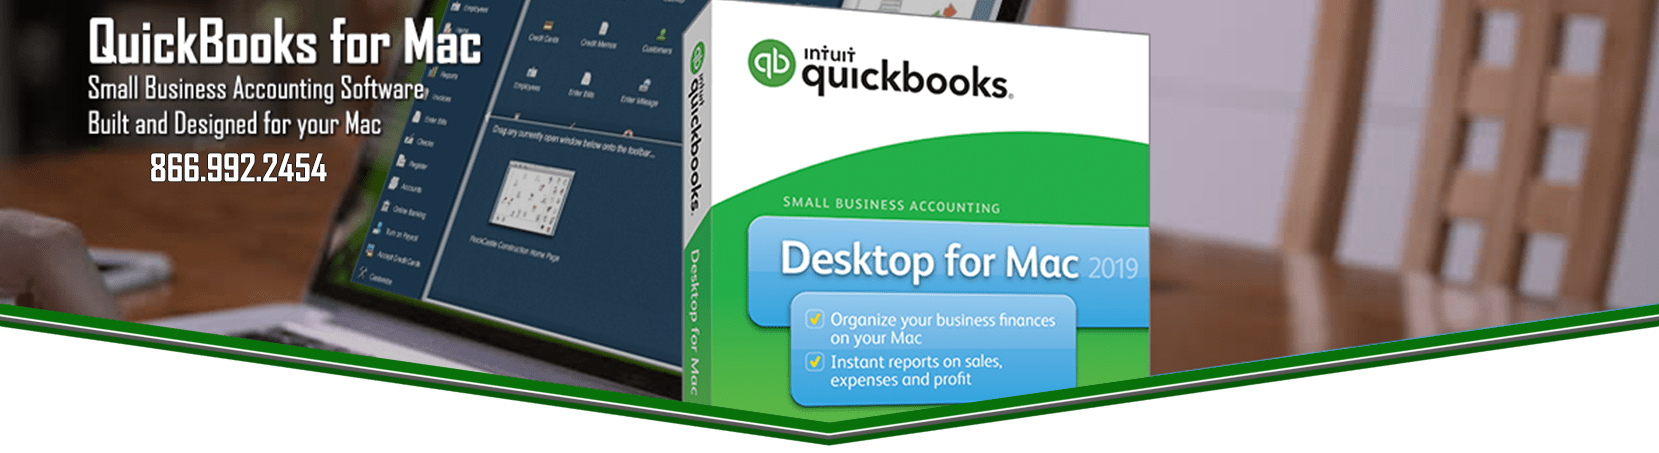 quickbooks versions compatible with mac